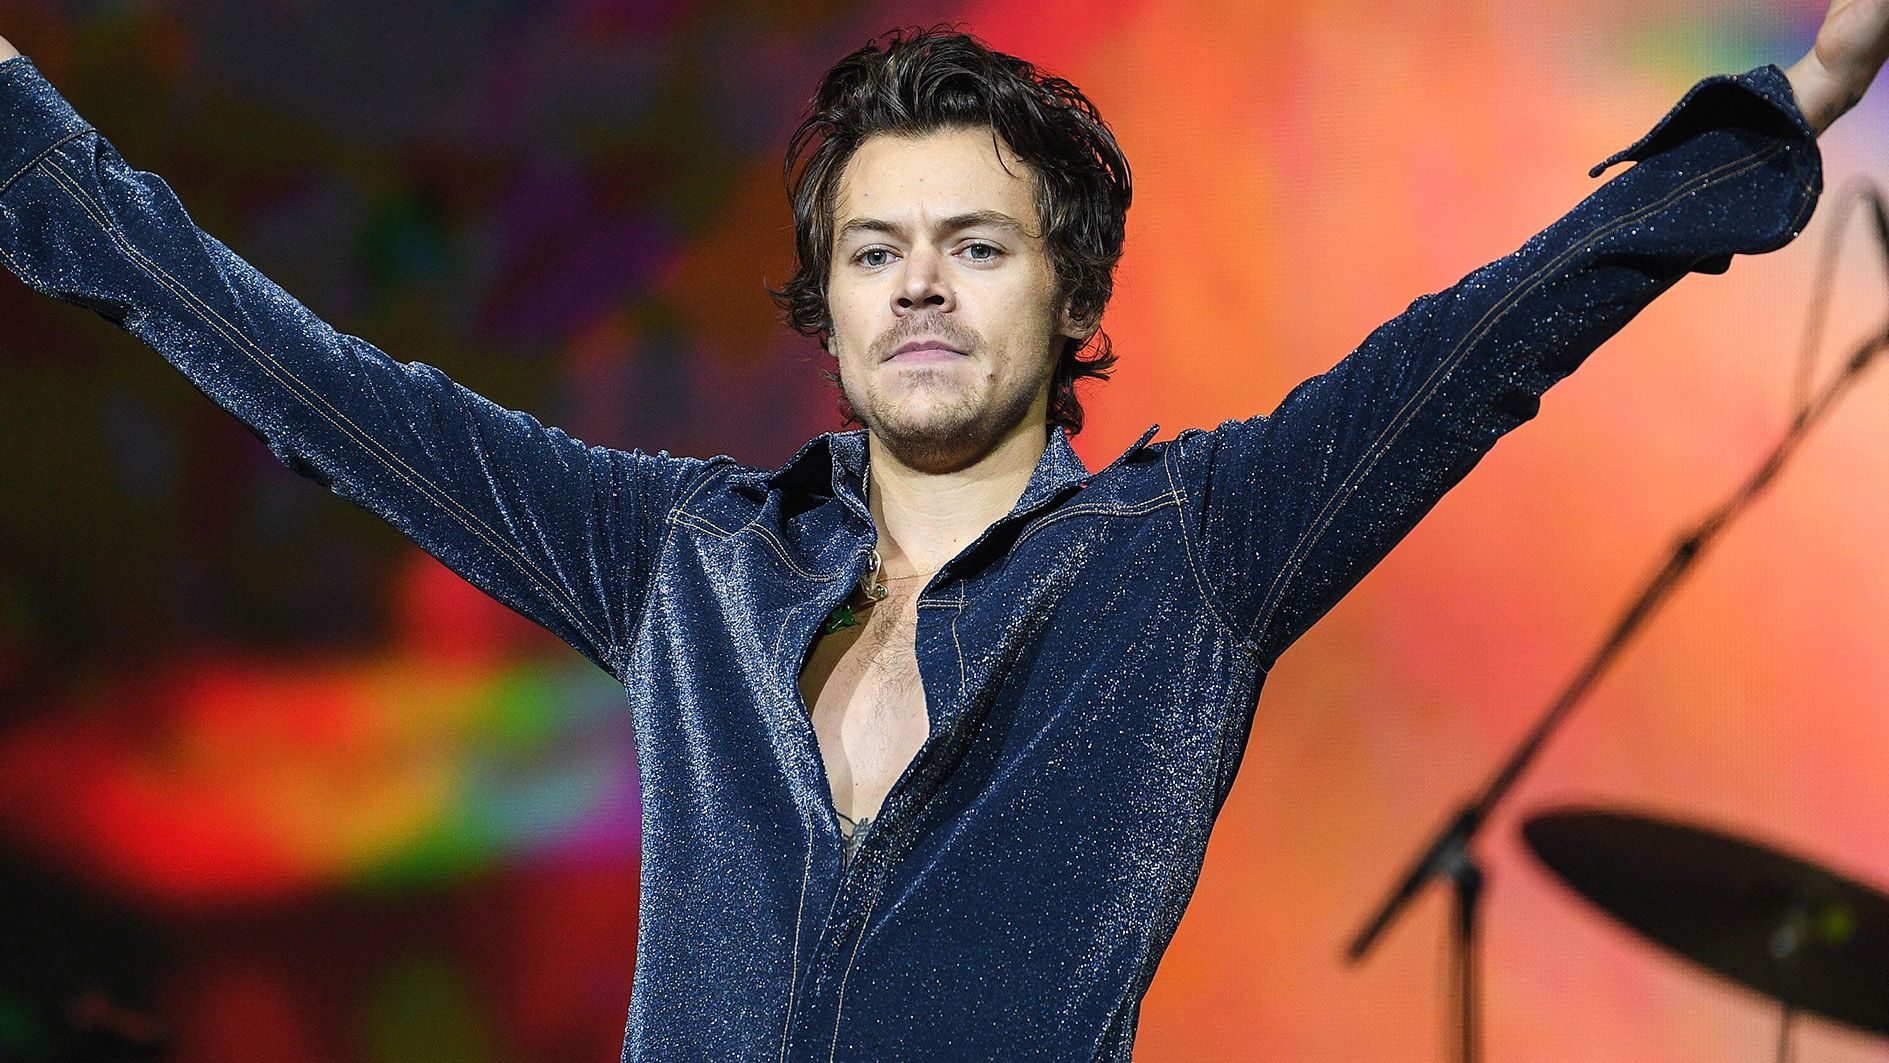 Harry Styles will bring his 'Love On Tour' back to the UK in 2023